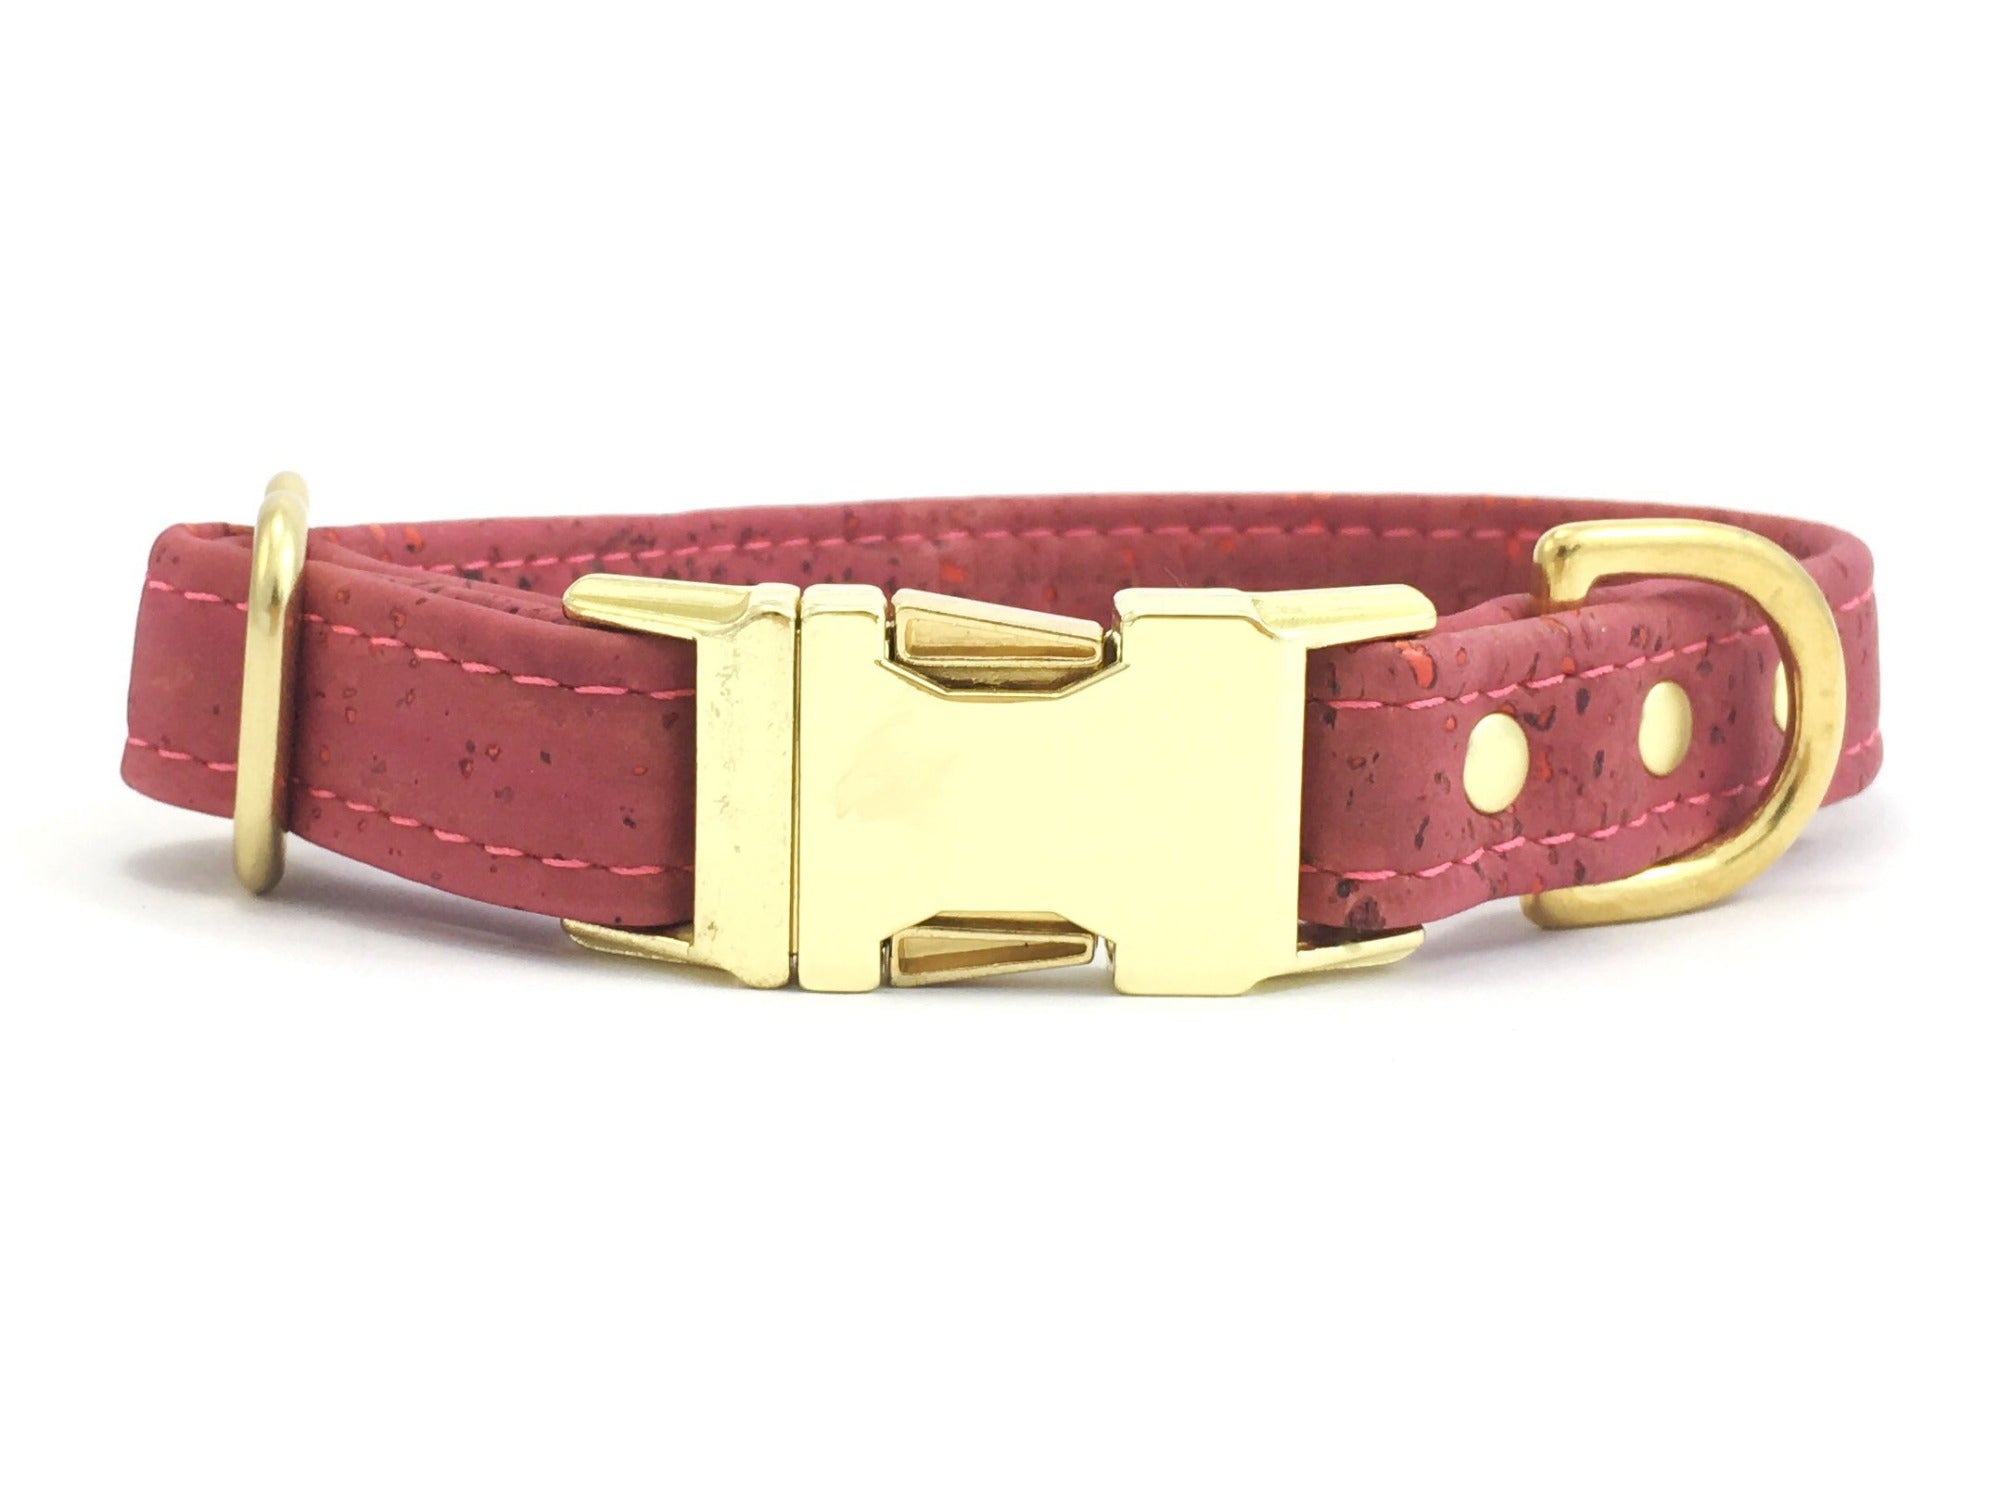 Pink dog collar in vegan cork leather with a luxury brass quick release buckle